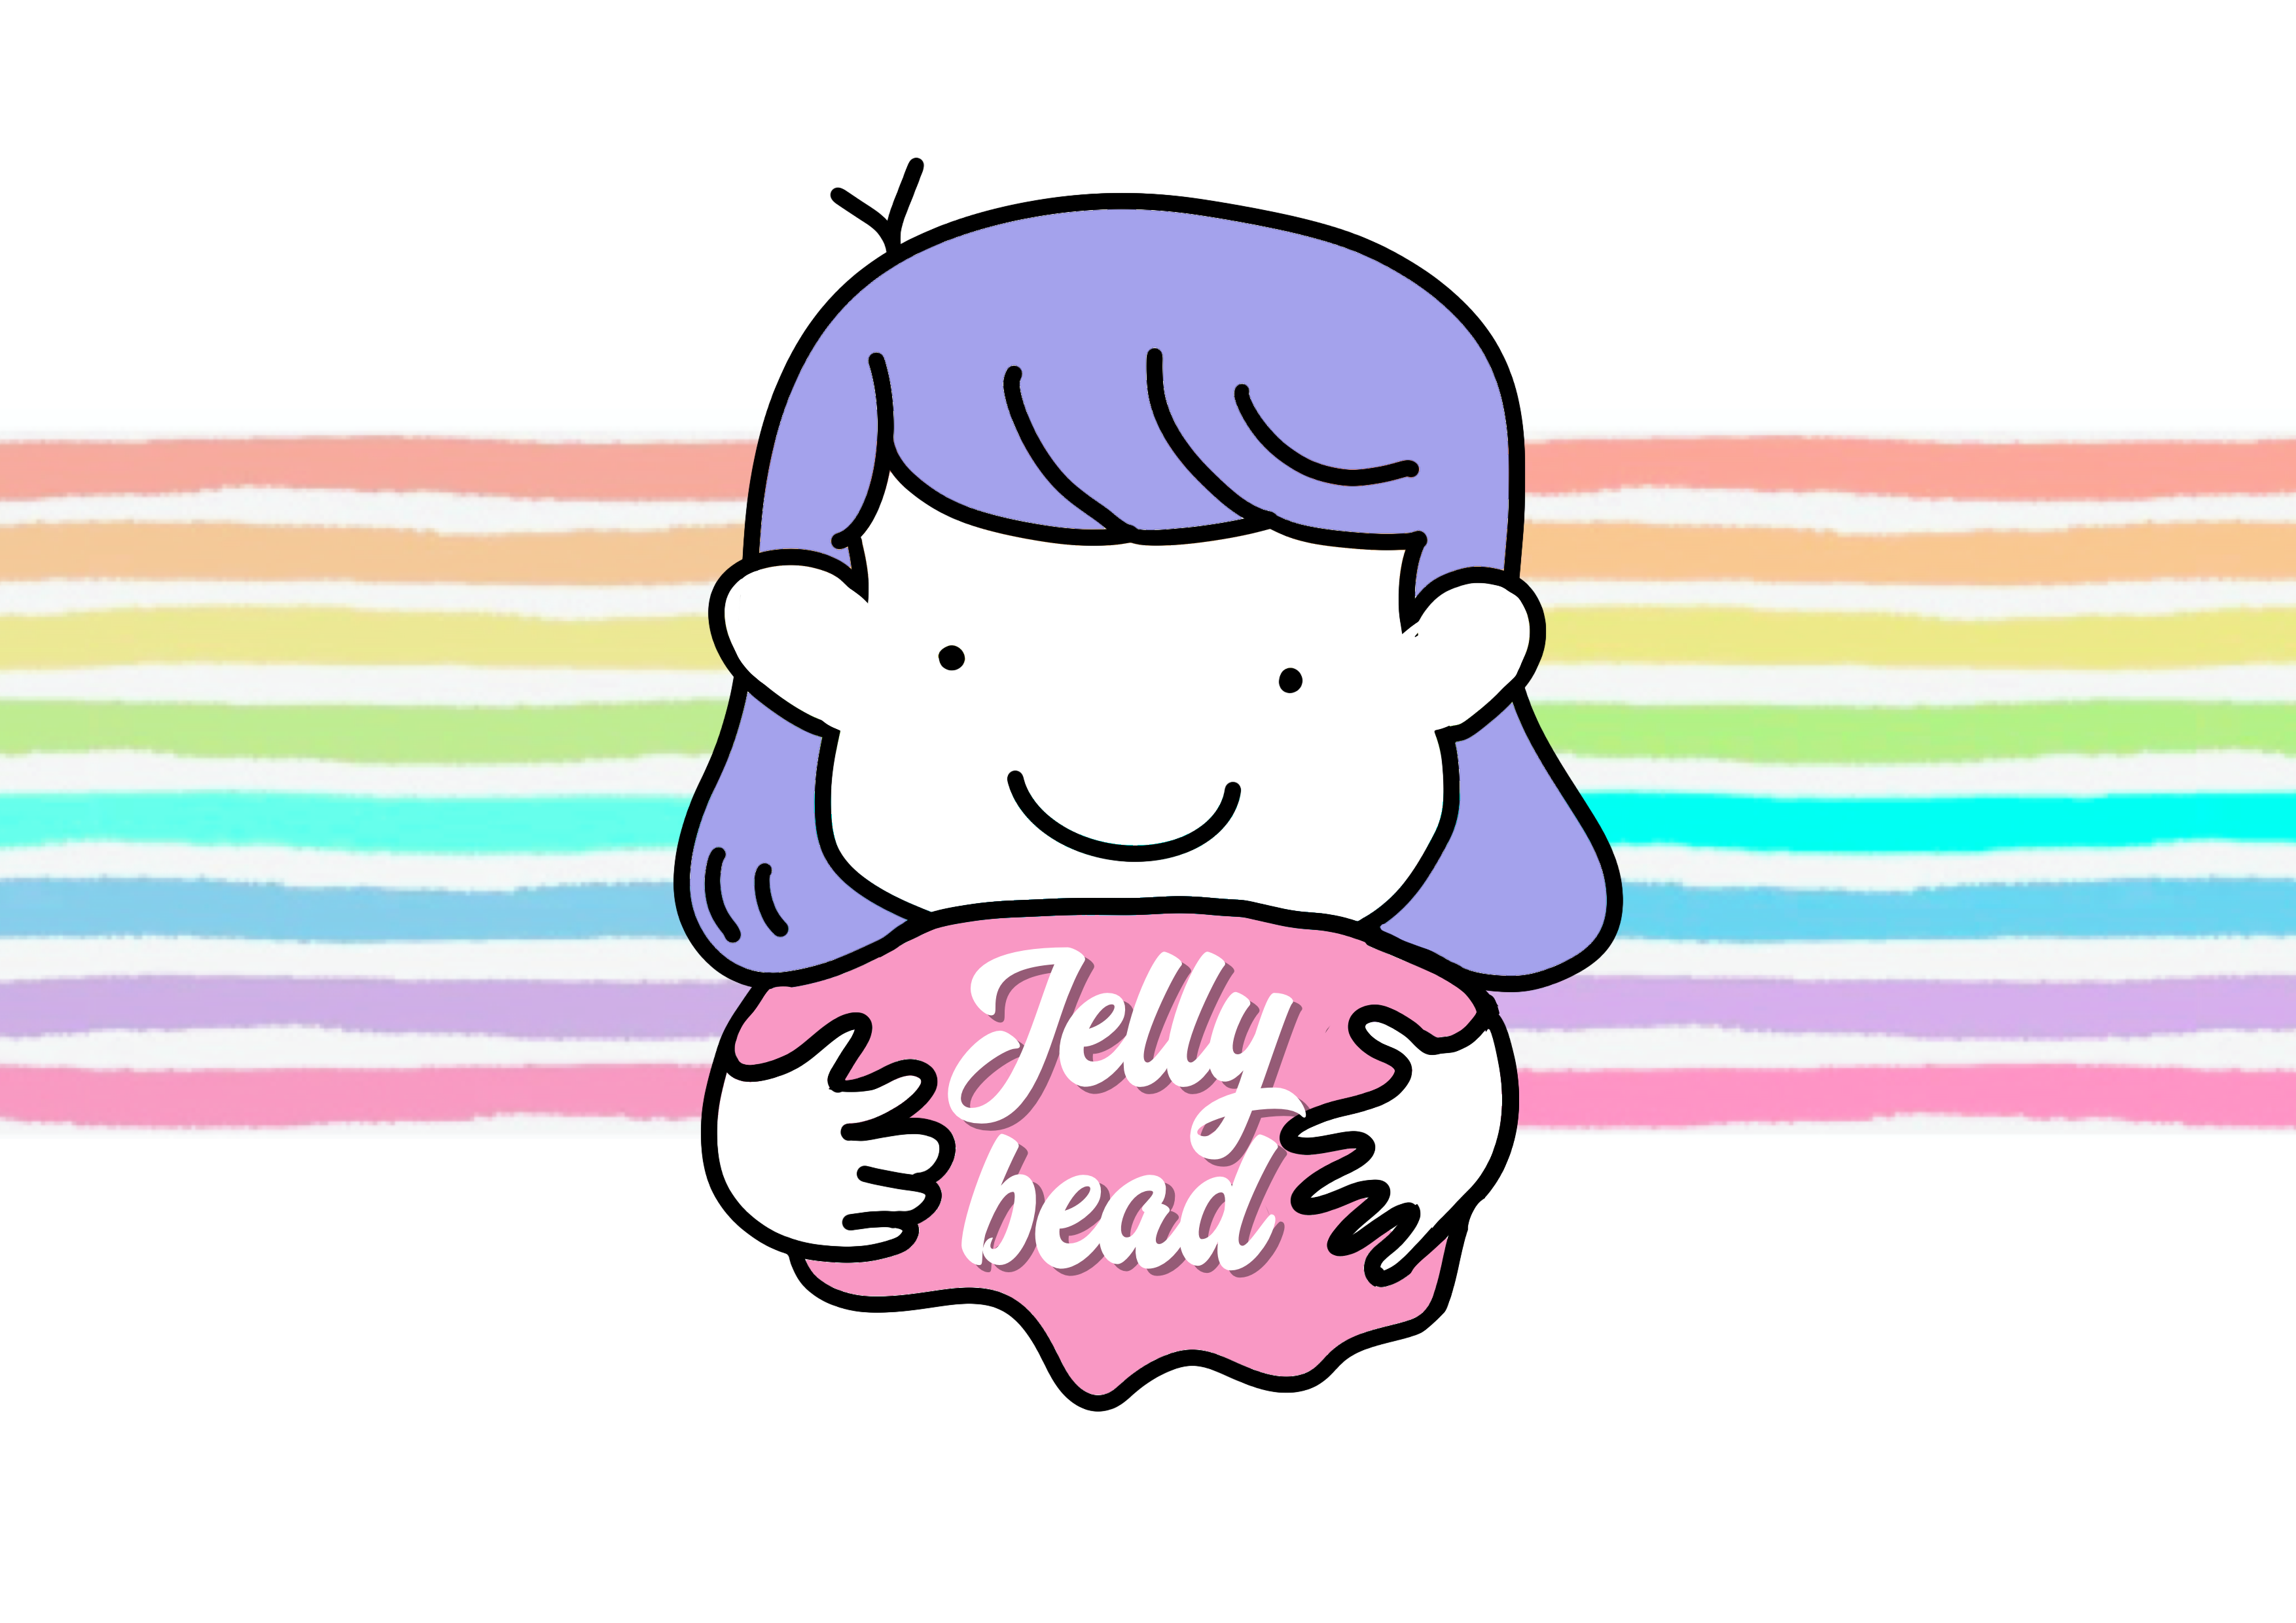 Jelly bead childrens Slime and Craft parties and workshops